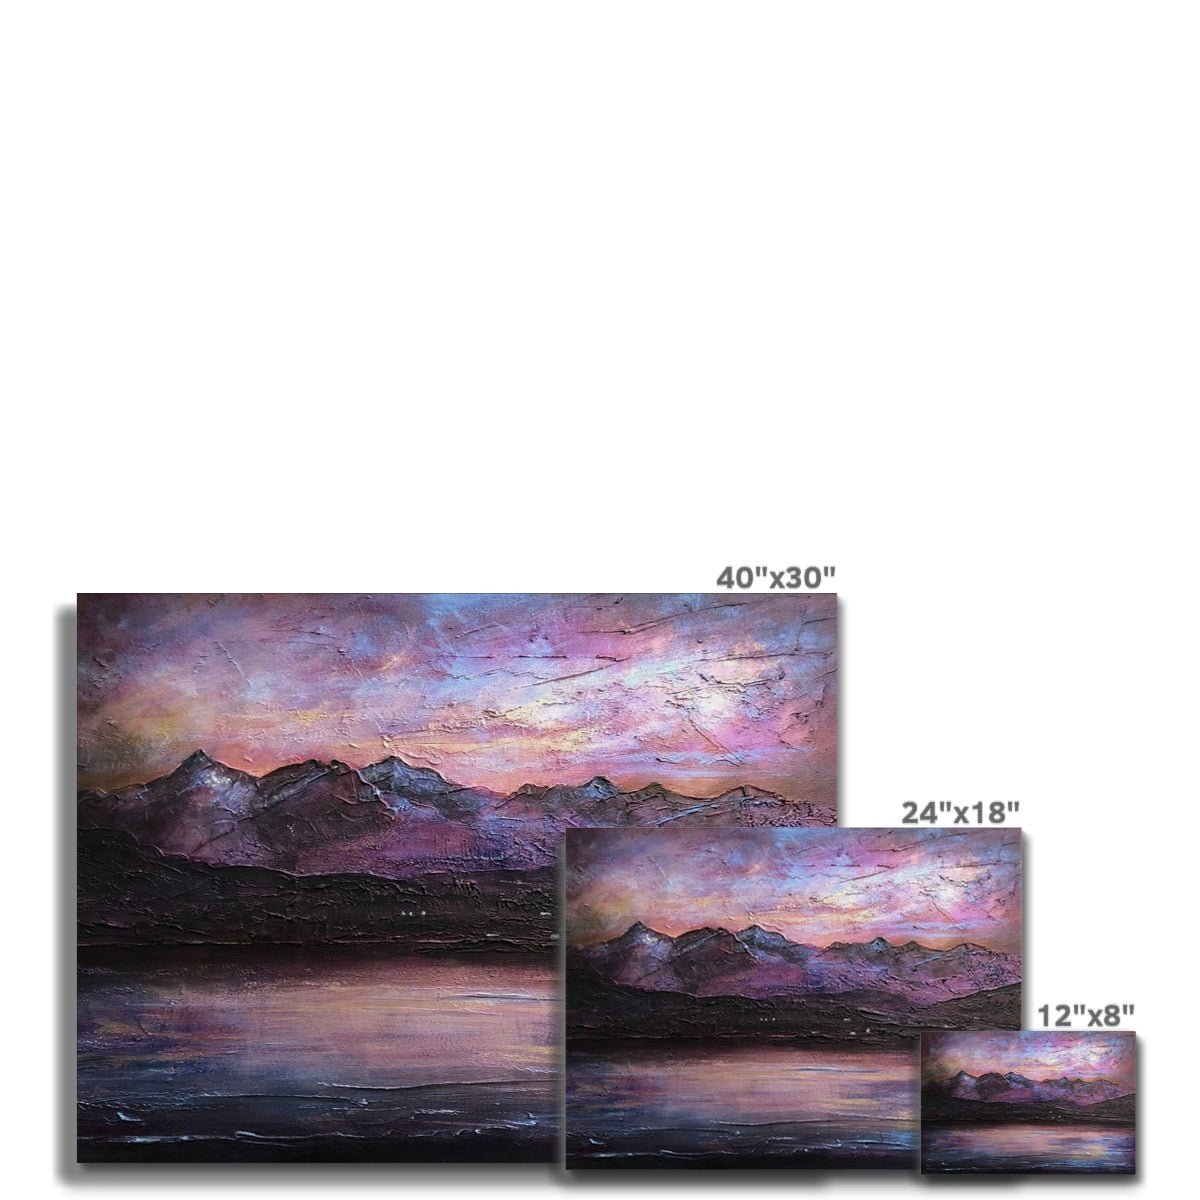 Last Skye Light Painting | Canvas From Scotland-Contemporary Stretched Canvas Prints-Skye Art Gallery-Paintings, Prints, Homeware, Art Gifts From Scotland By Scottish Artist Kevin Hunter